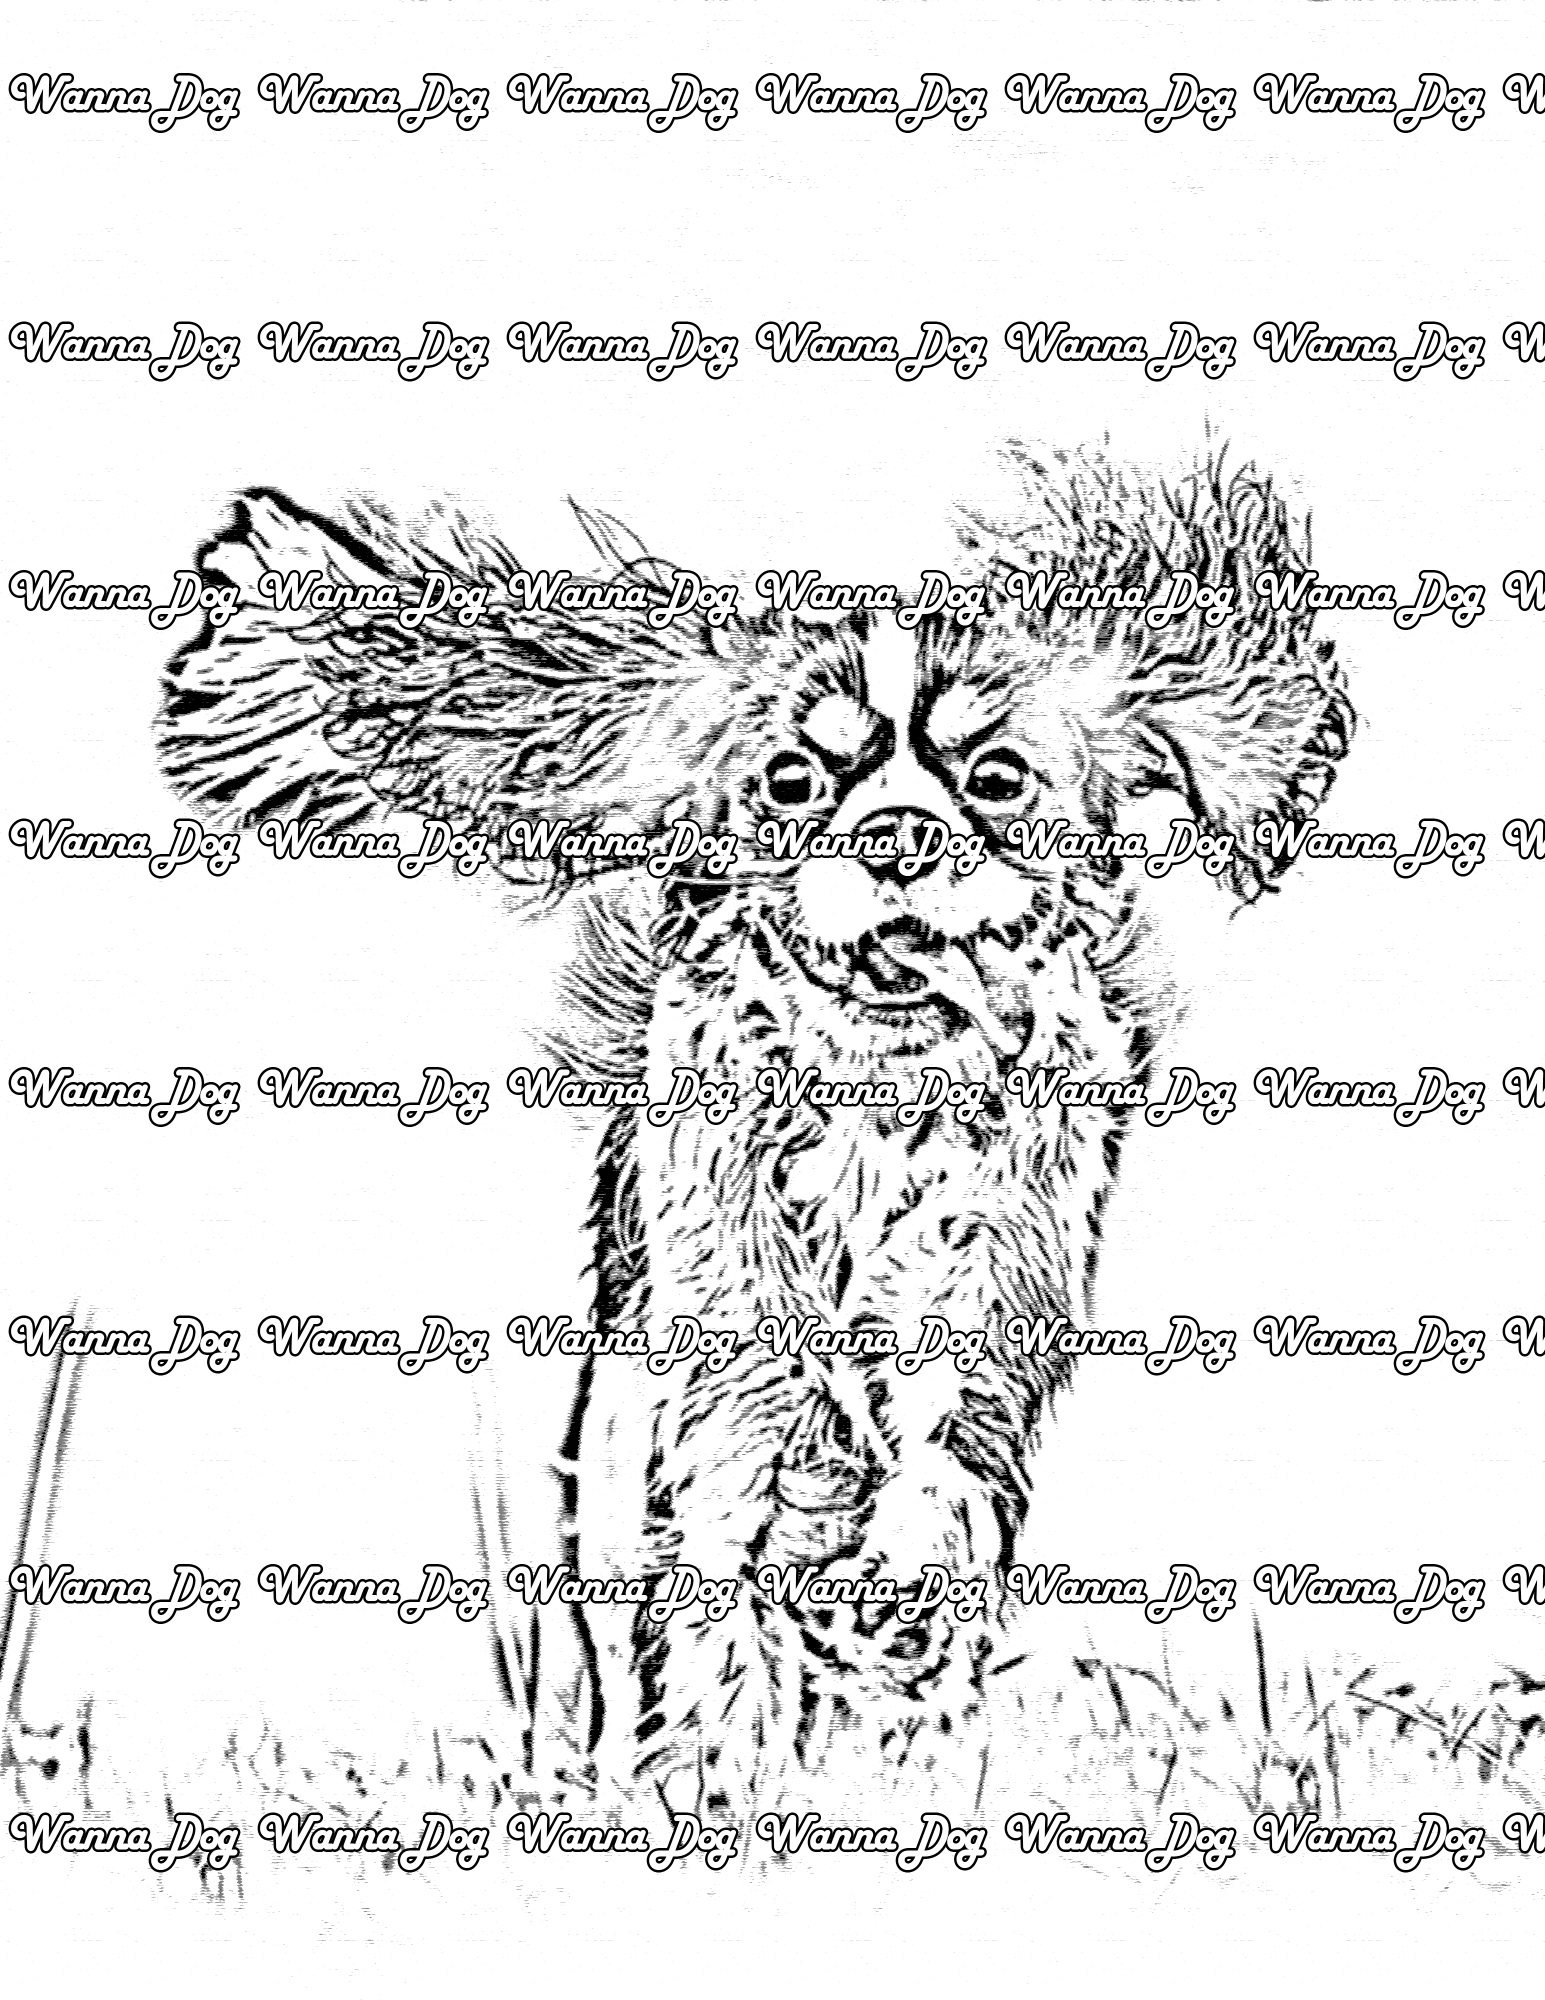 Cavalier King Charles Spaniel Coloring Page of a Cavalier King Charles Spaniel running with their ears out